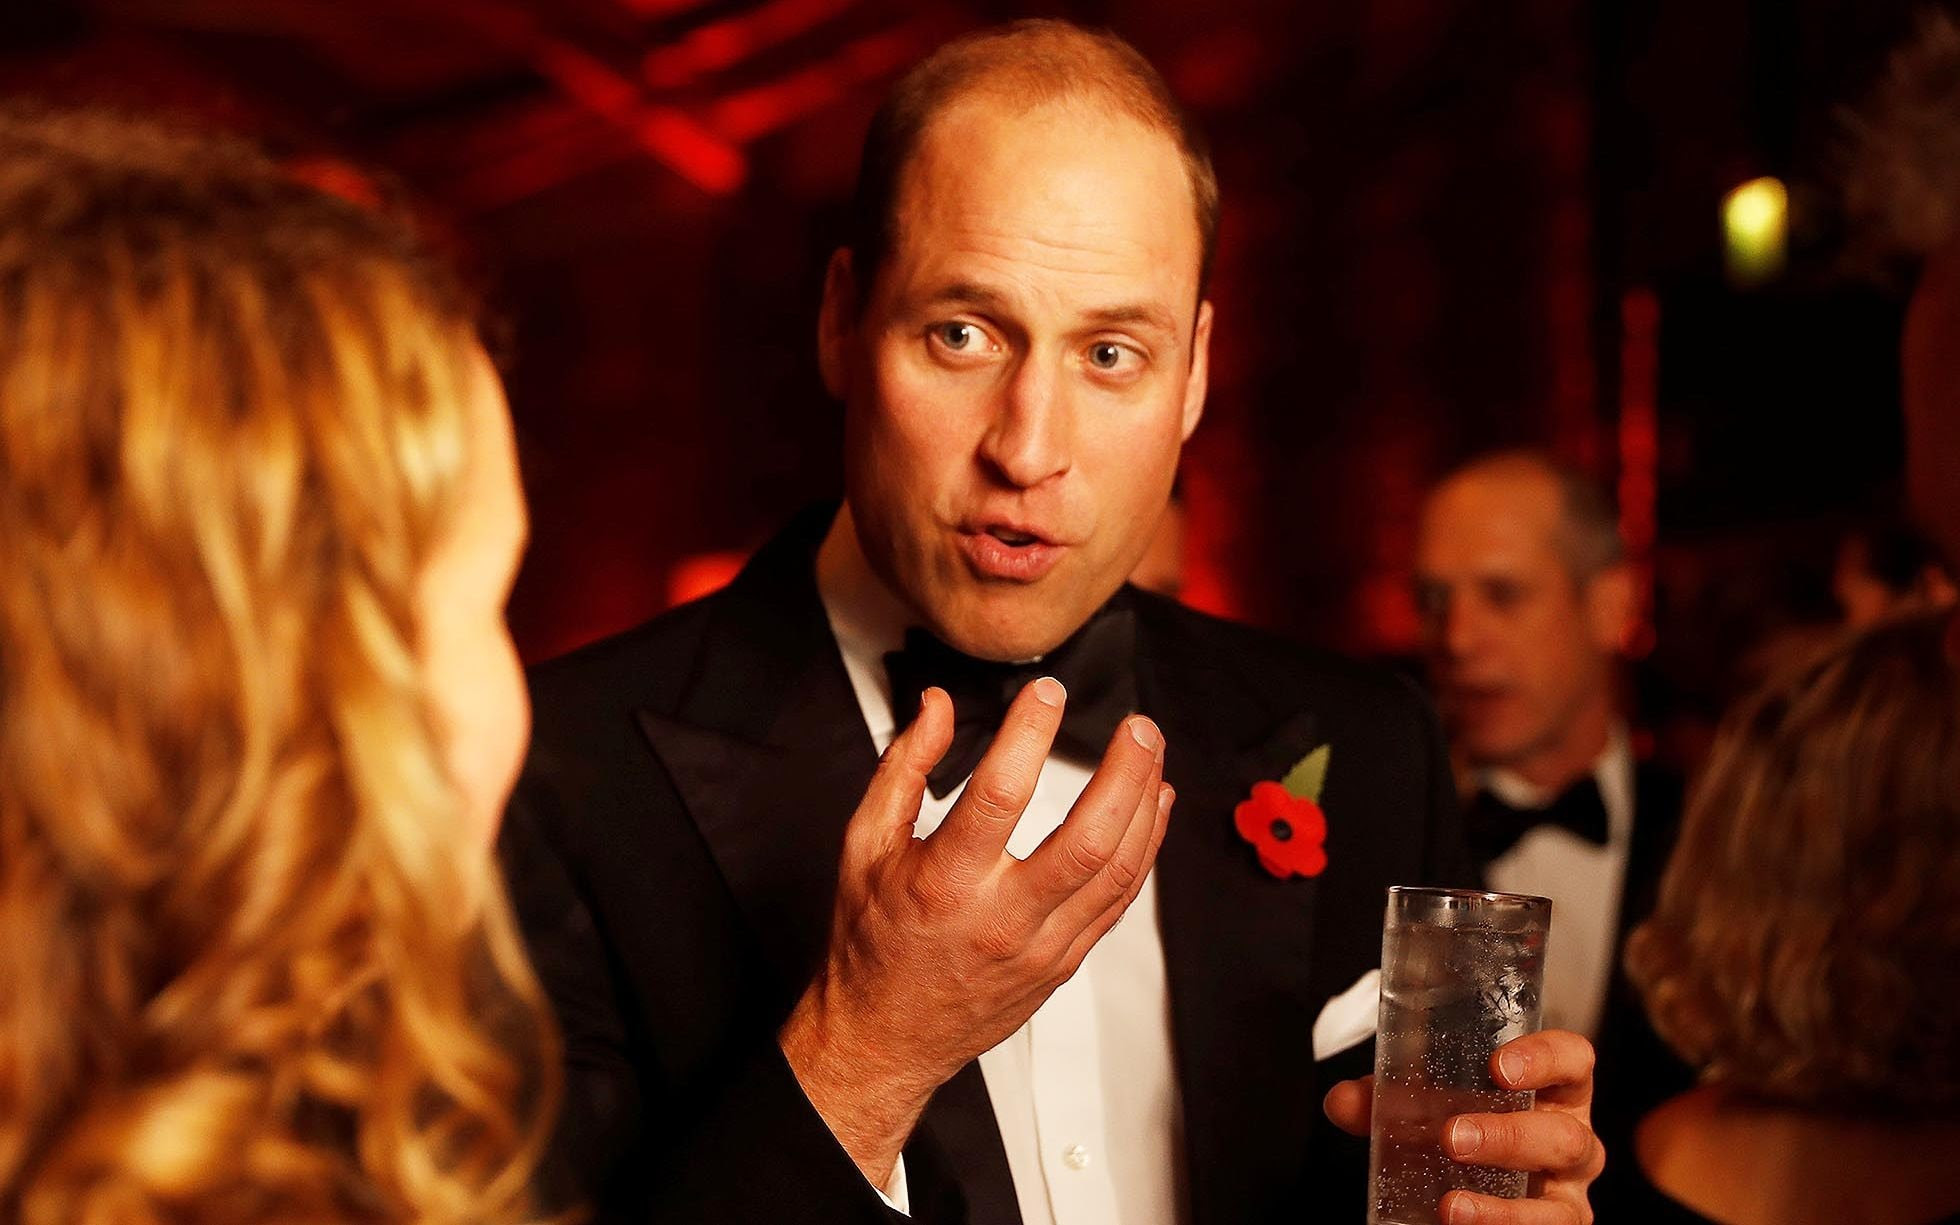 Prince William Wants Lots of People Dead, Trump Banned From Twitter and Donna Brazile Drops Hillary Bombshell